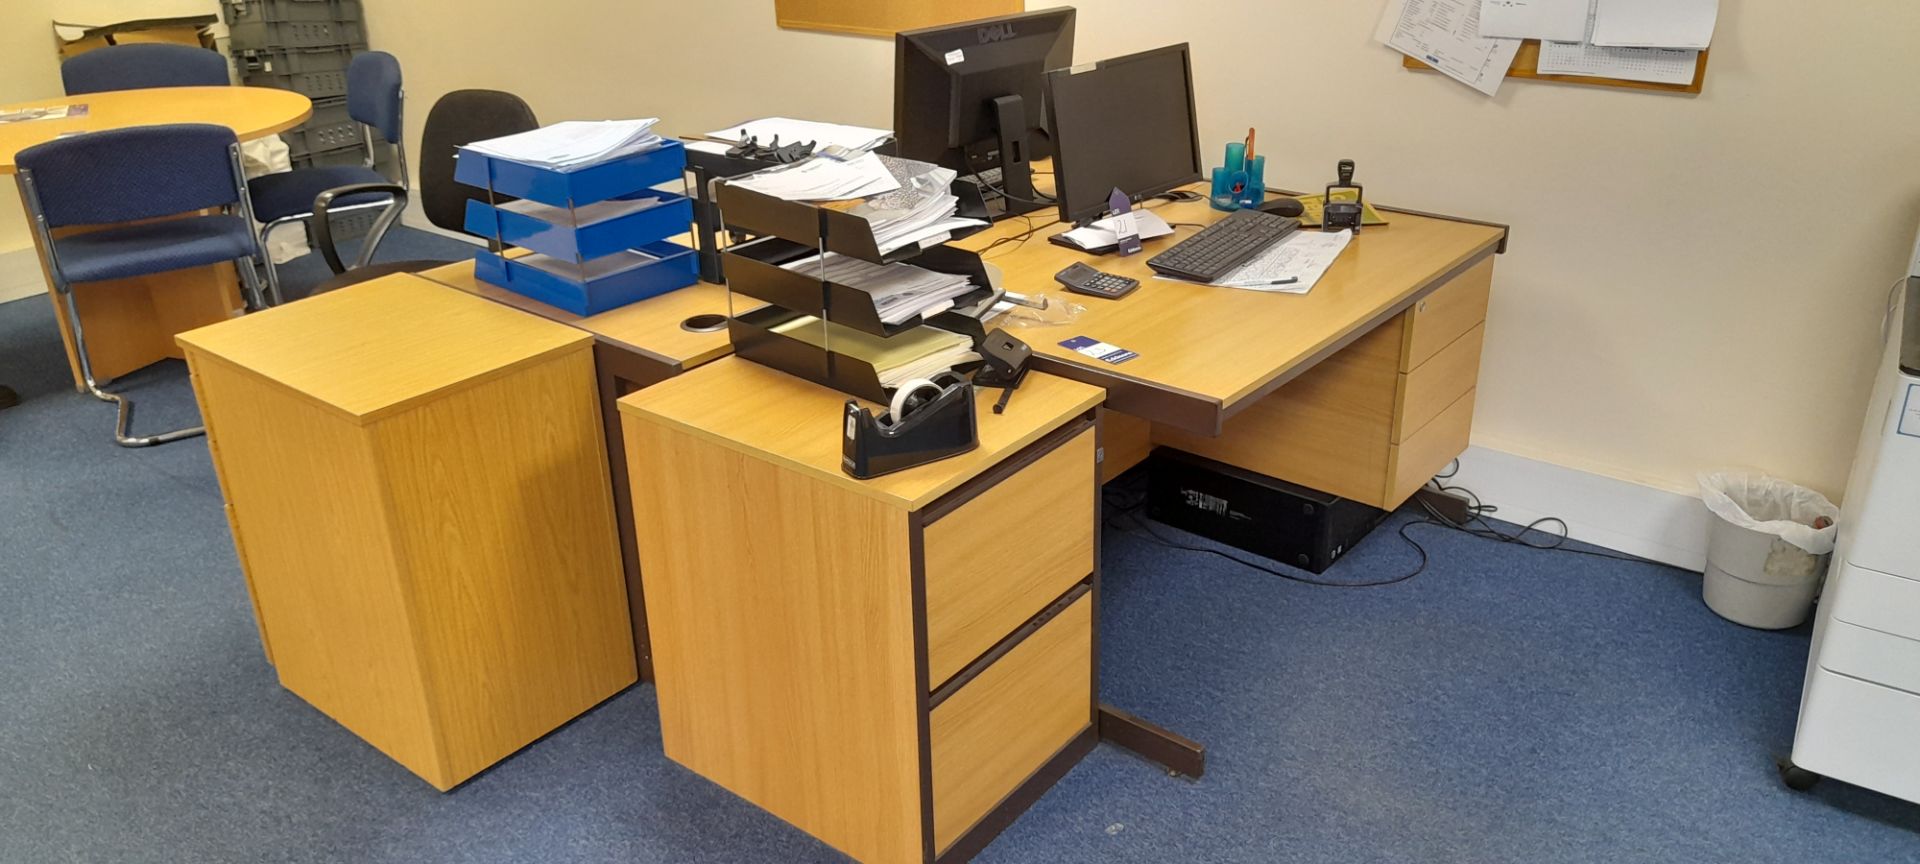 2x Straight edge cantilever office desk with inbuilt drawers and 2x mobile pedestals - Image 2 of 3